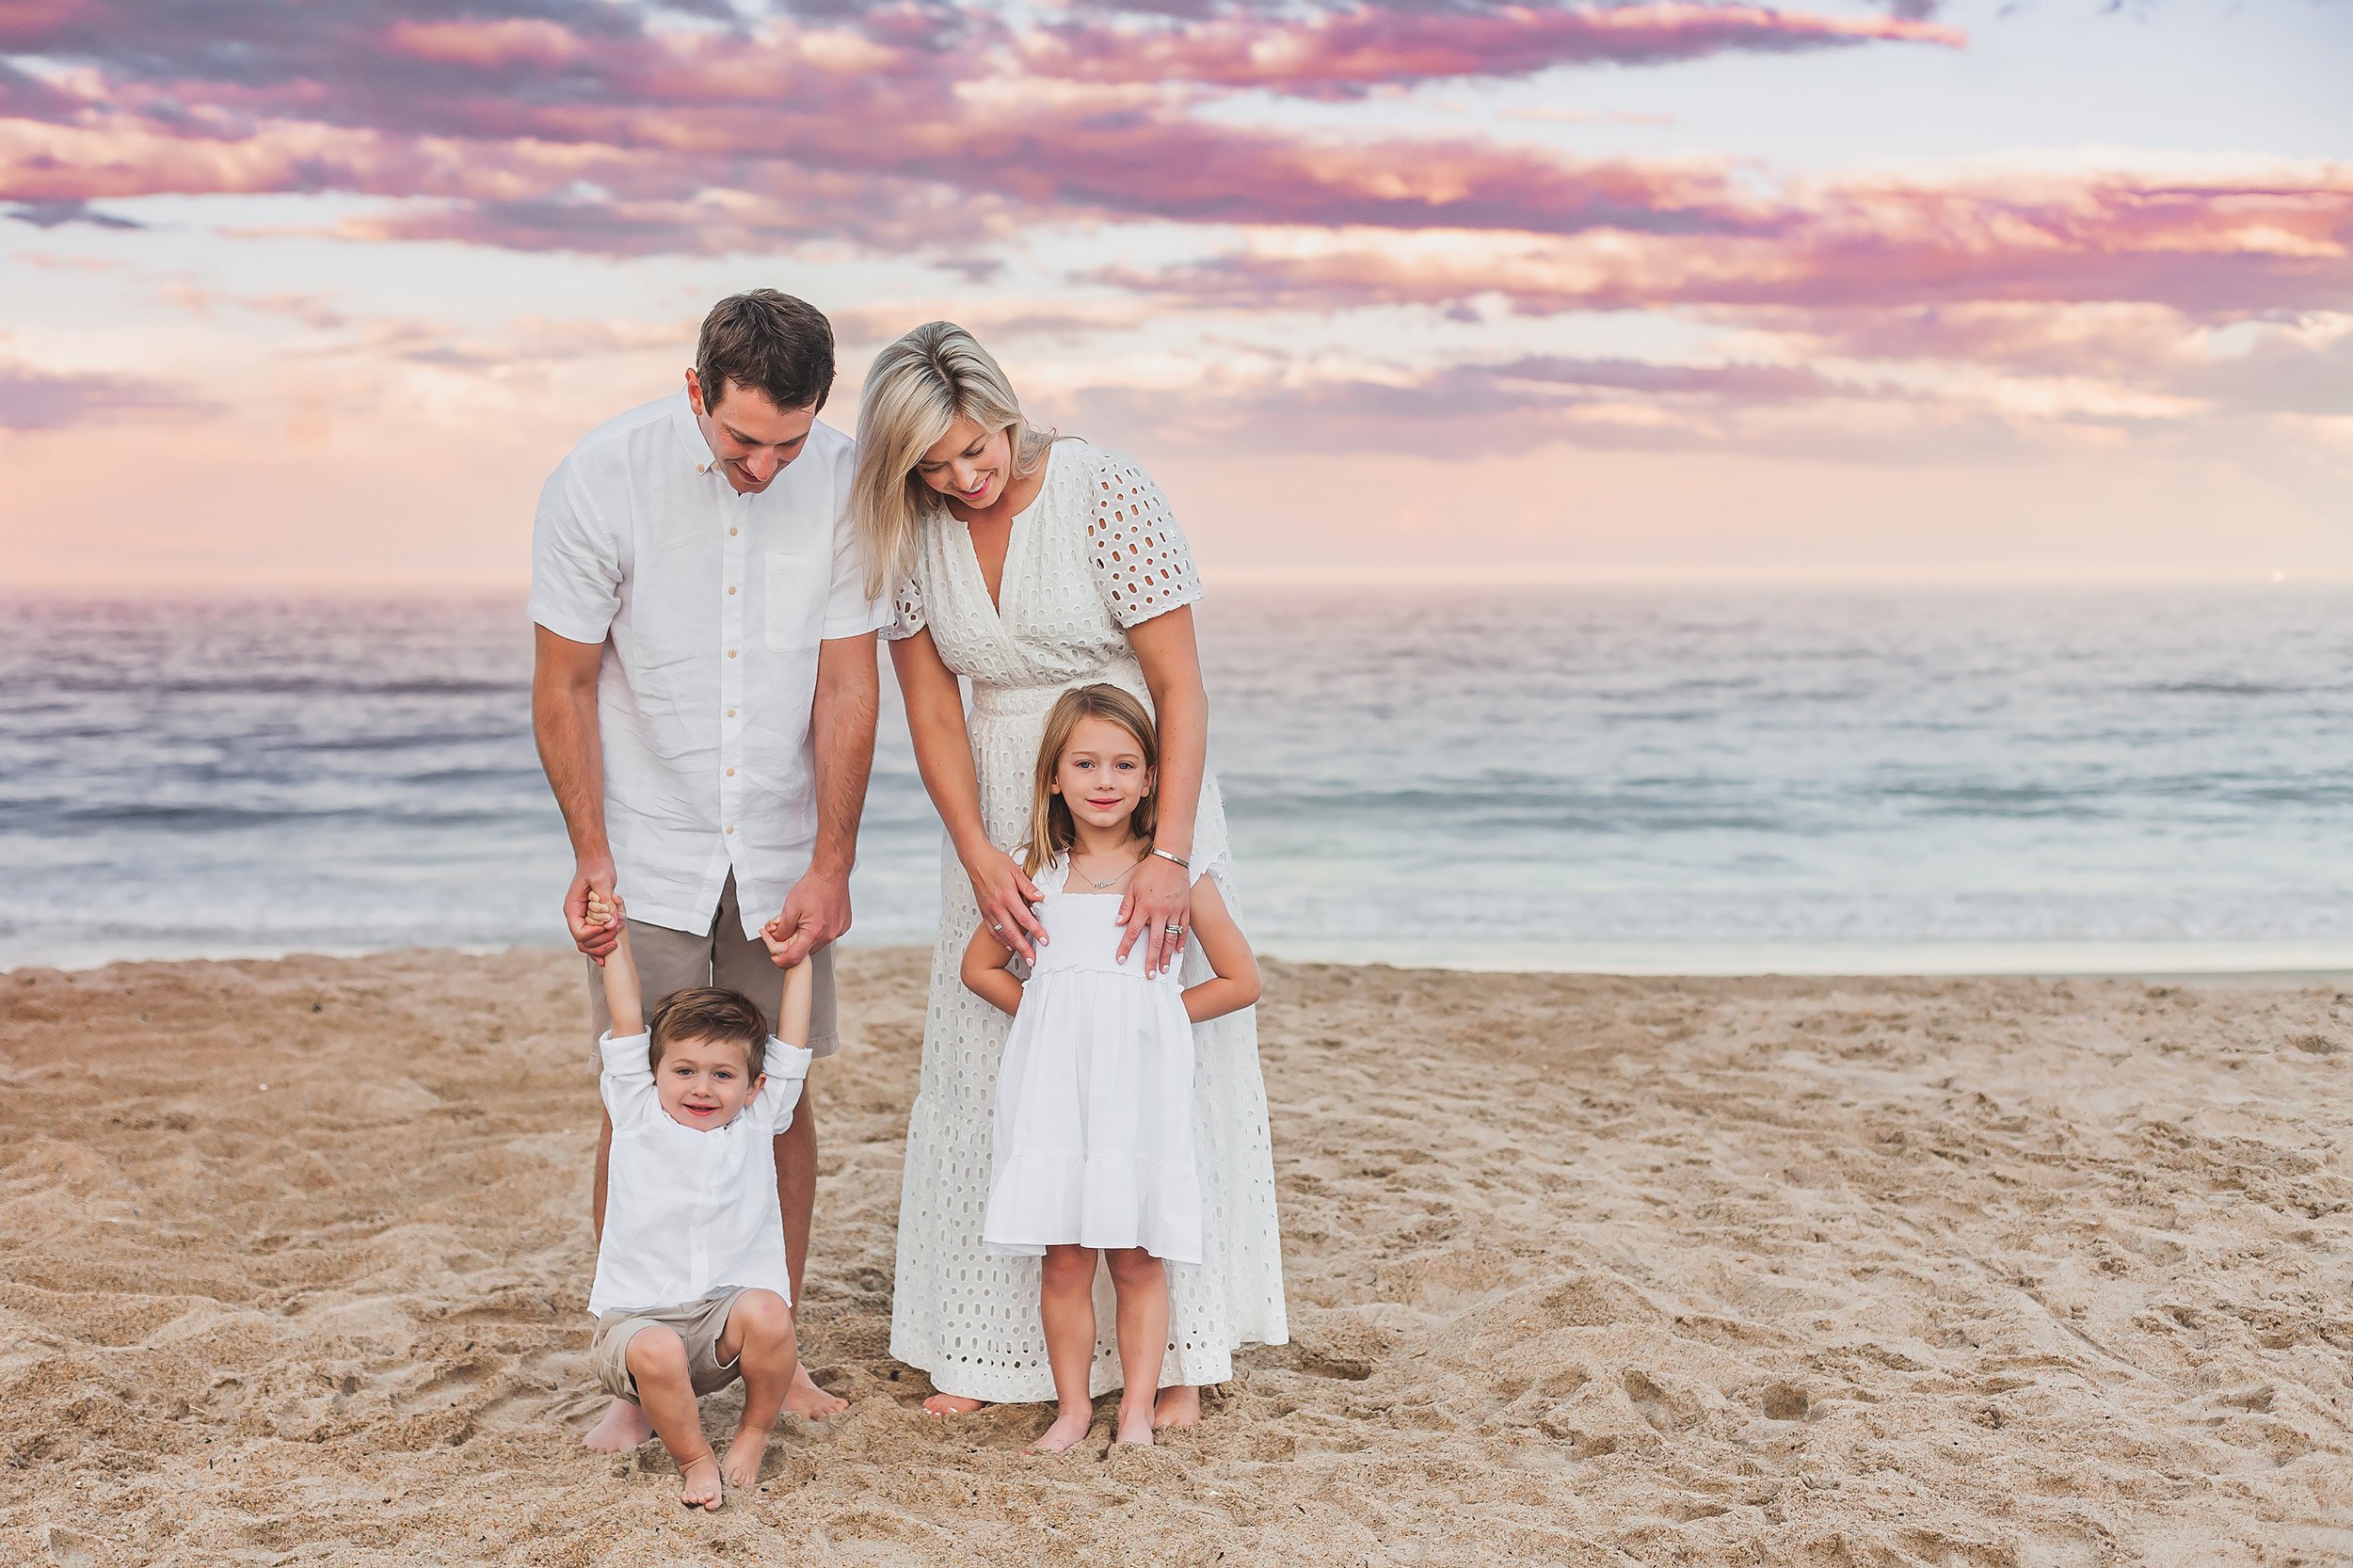 Marblehead Family Portrait Session | Stephen Grant Photography